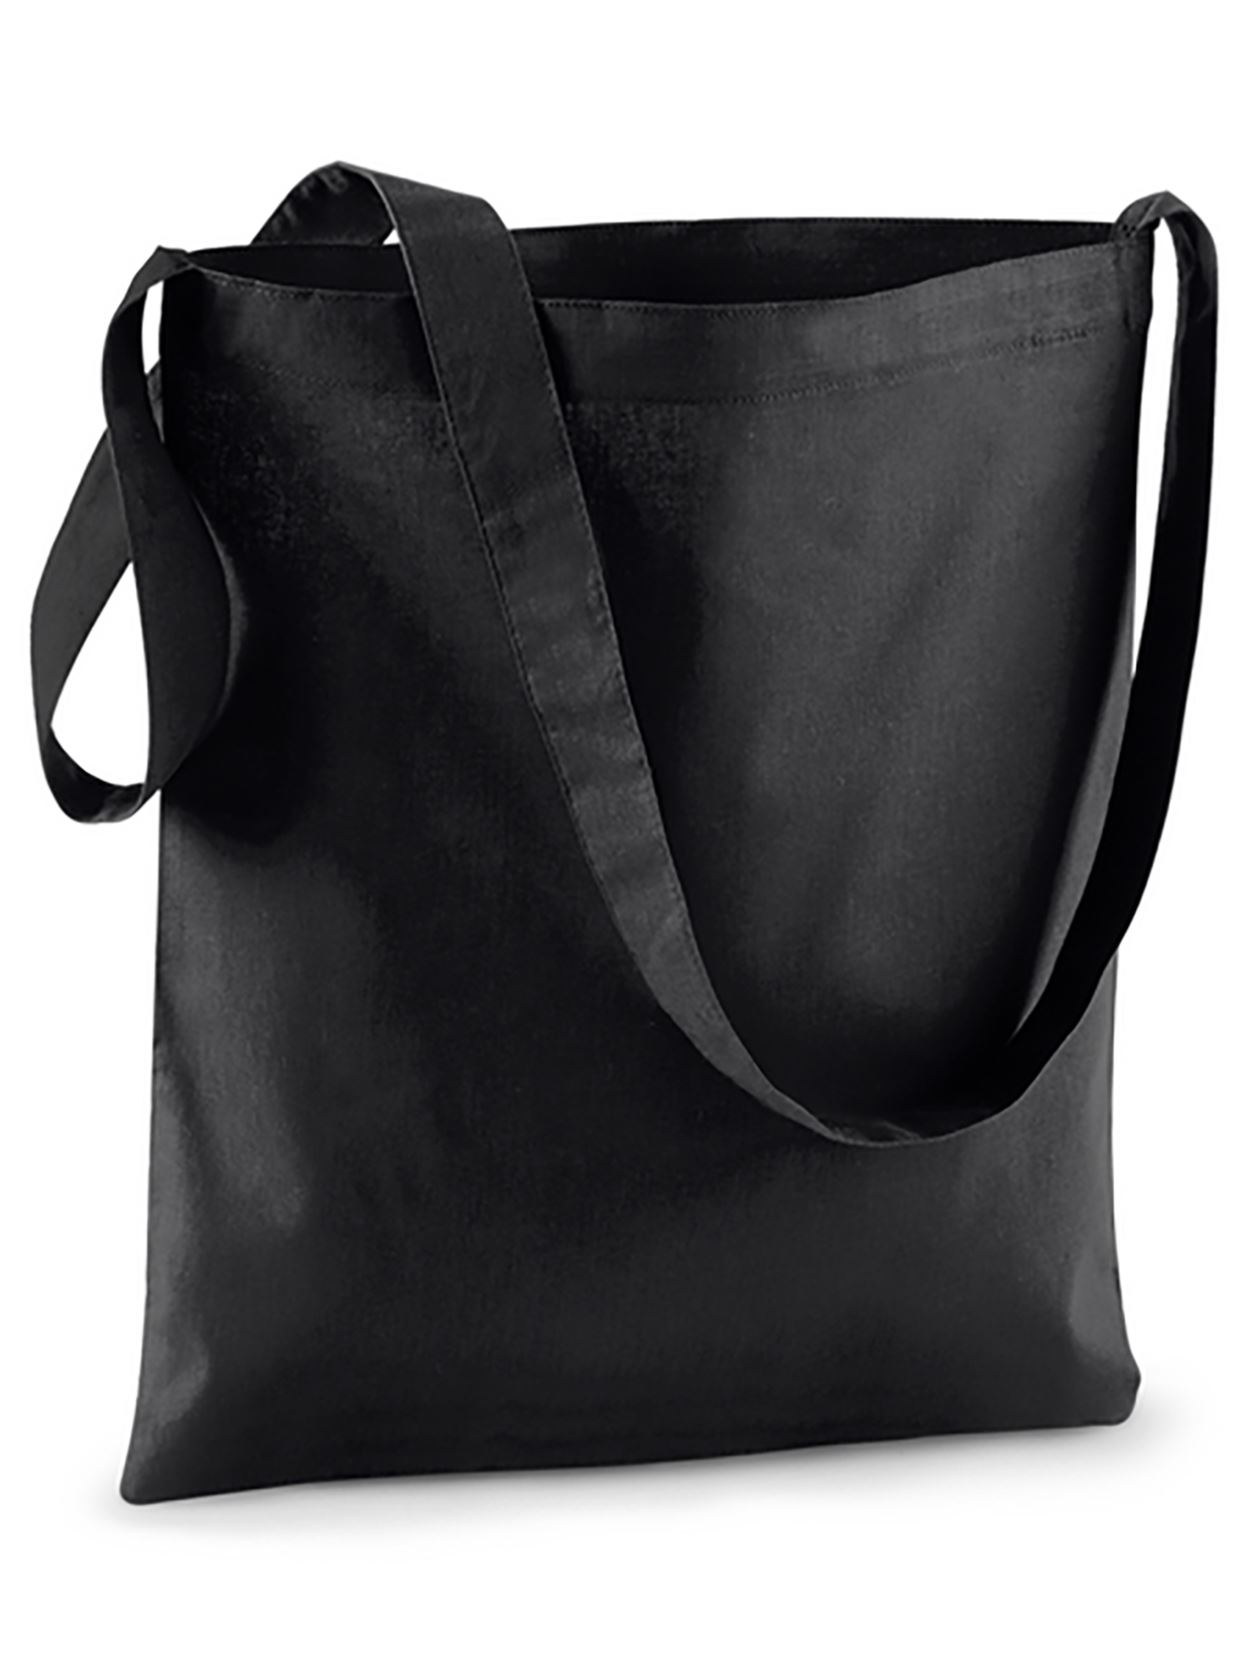 W107 Sling Tote Image 5